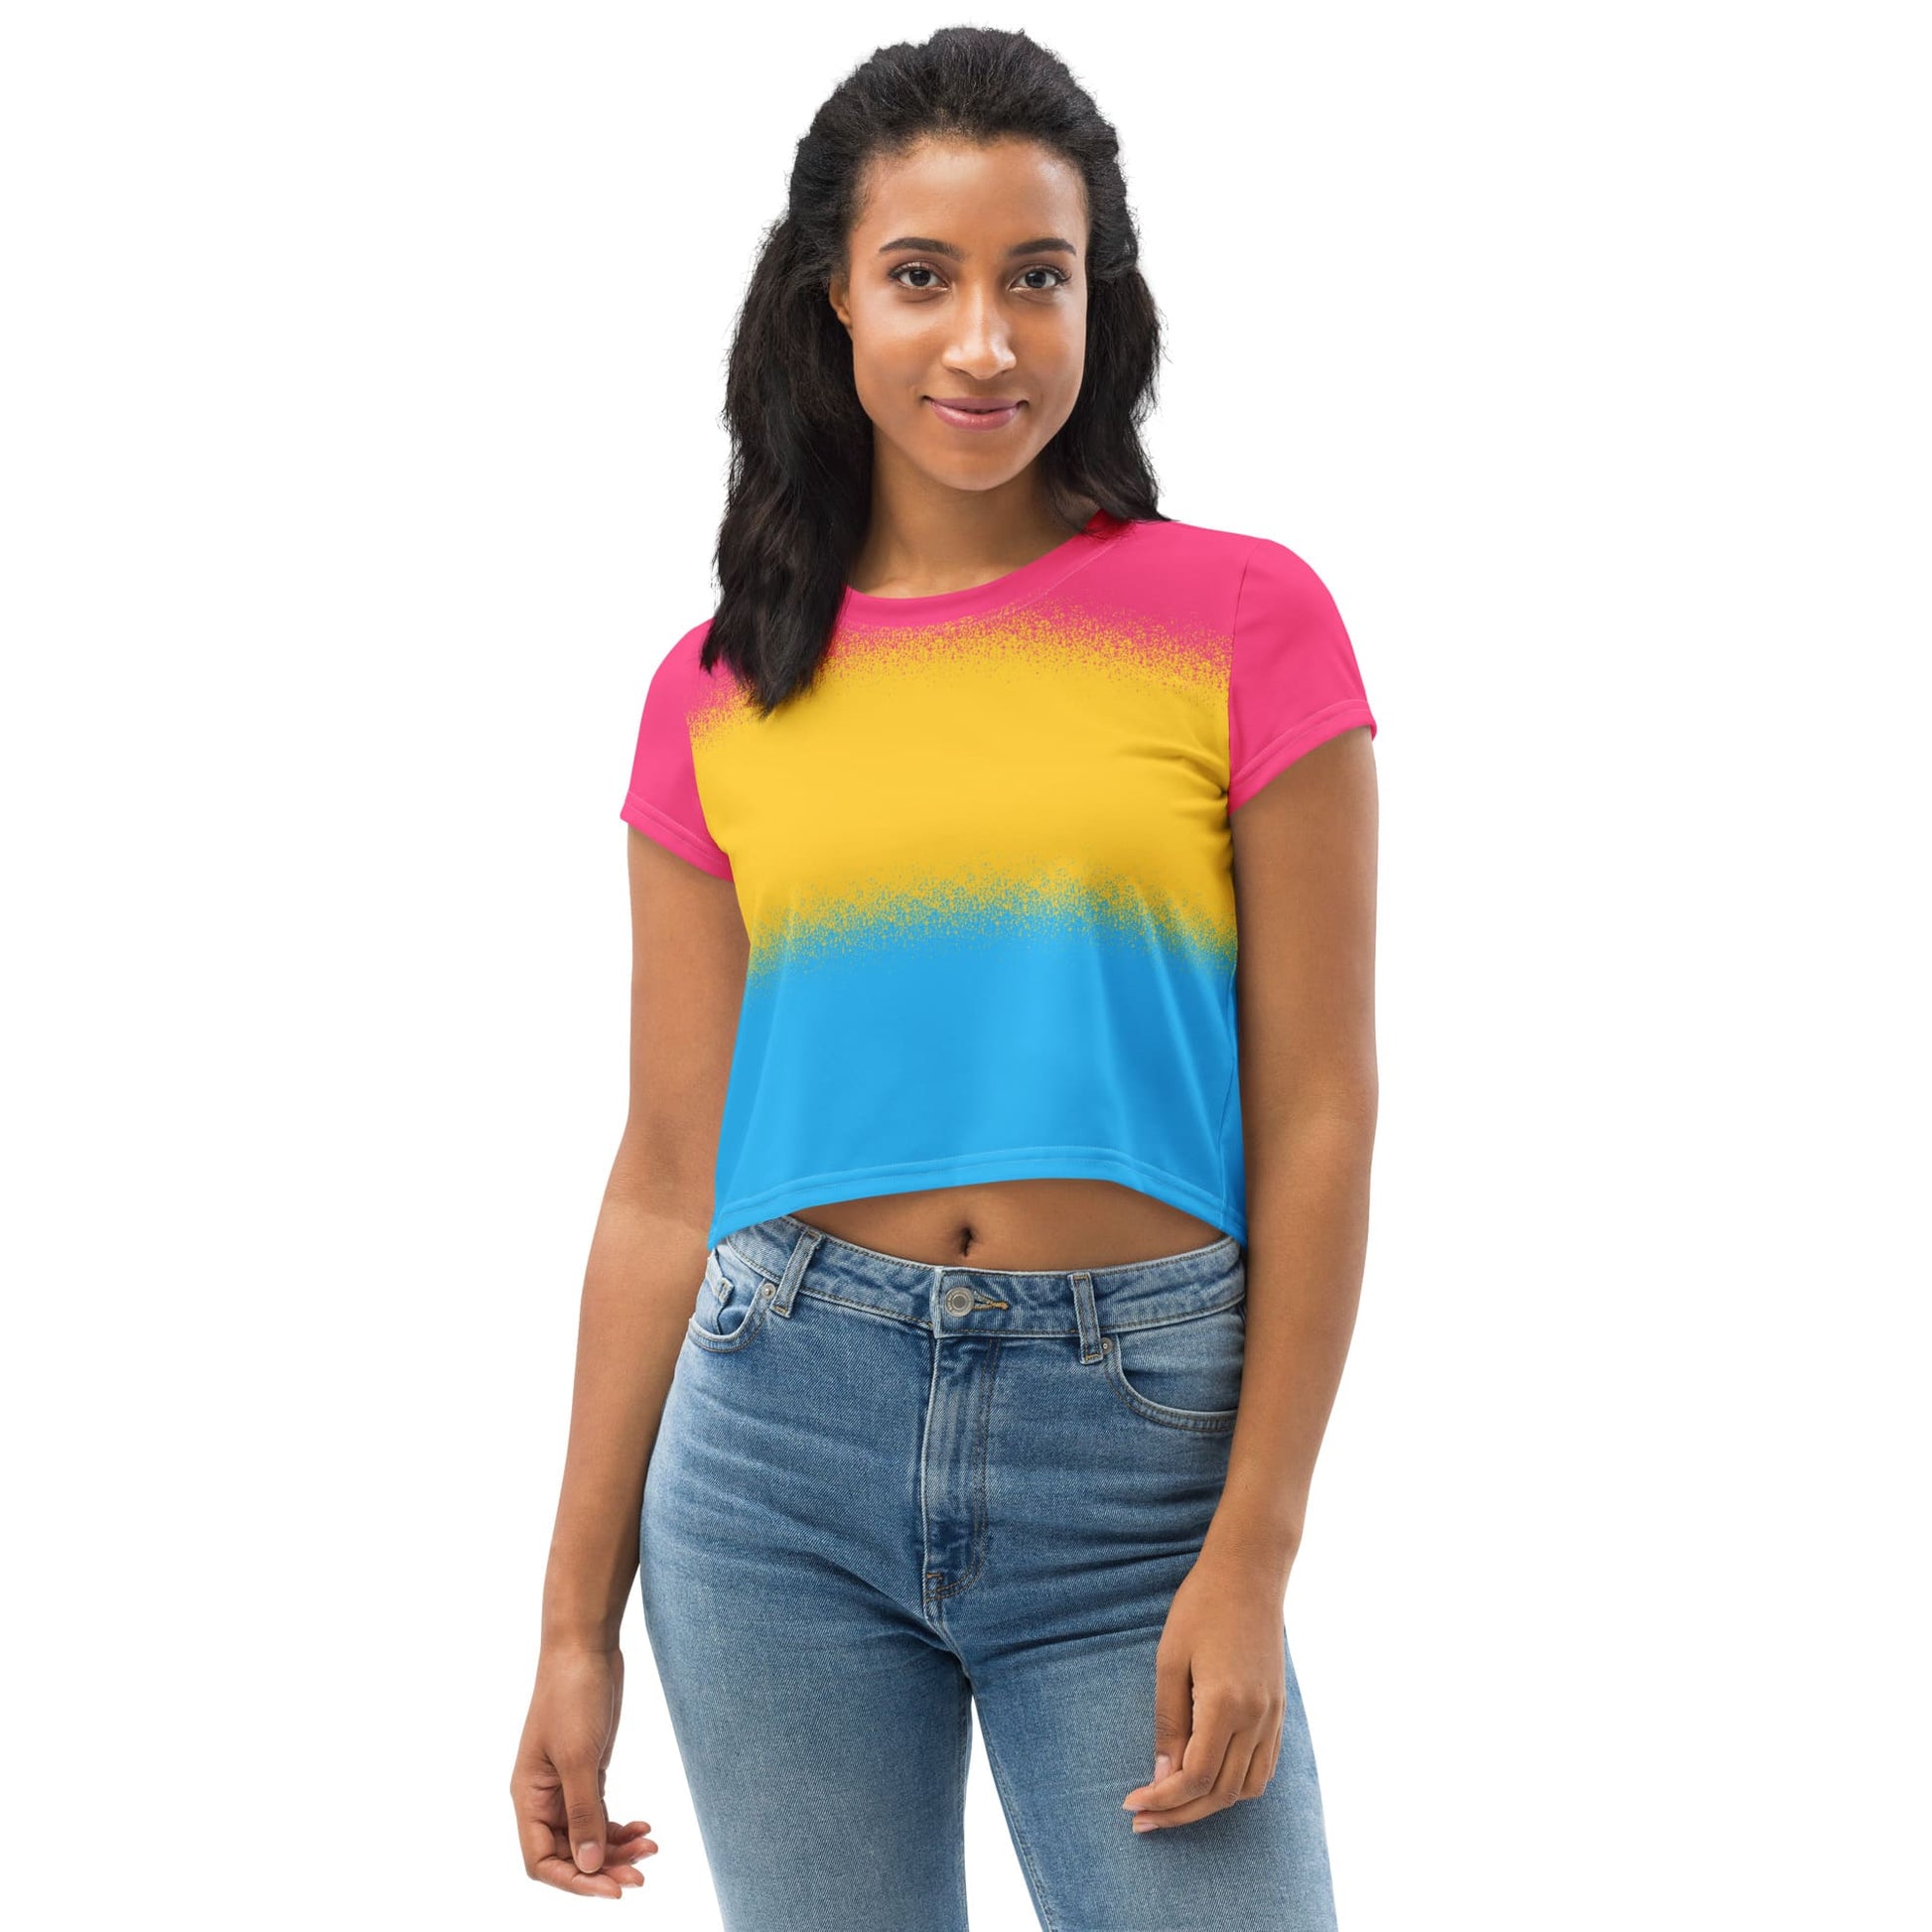 pansexual crop top, pan pride cropped shirt with wings on back, front